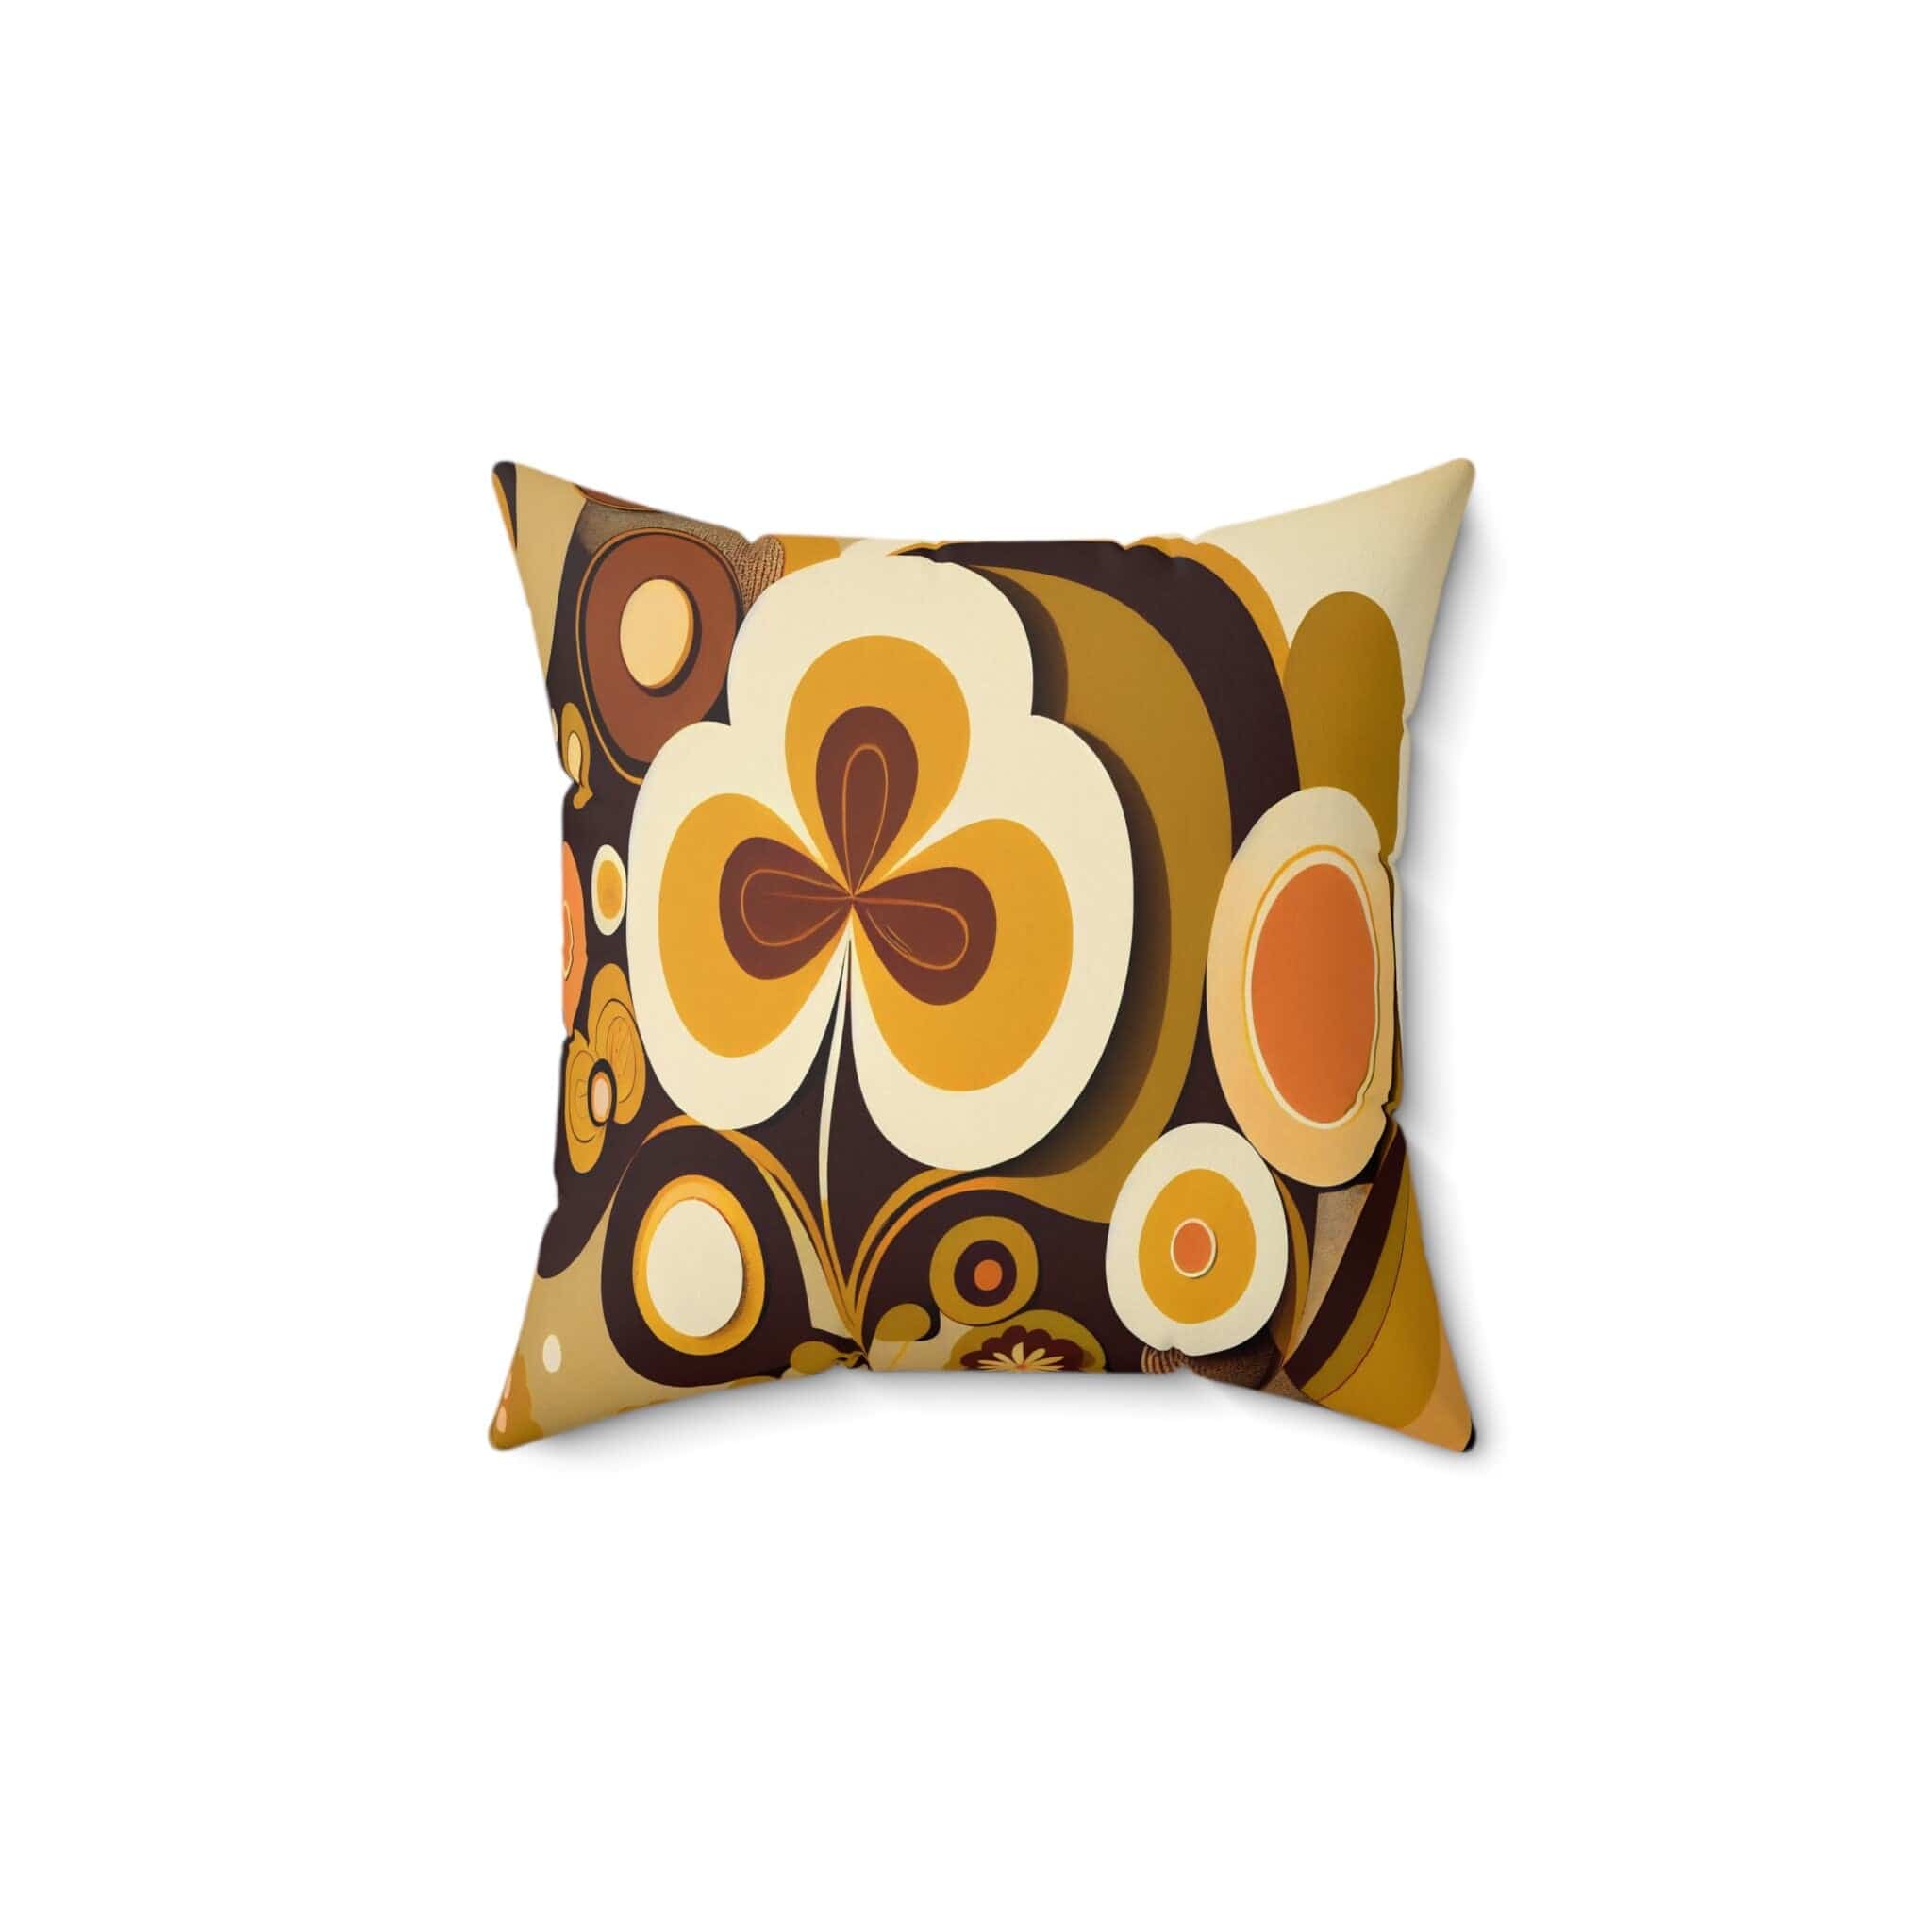 Kate McEnroe New York 60s Mid Mod Geometric Retro Floral Throw Pillow with Insert, MCM 70s Groovy, Hippie Bold Abstract Living Room, Bedroom Decor - 122981223Throw Pillows78732734622005225360